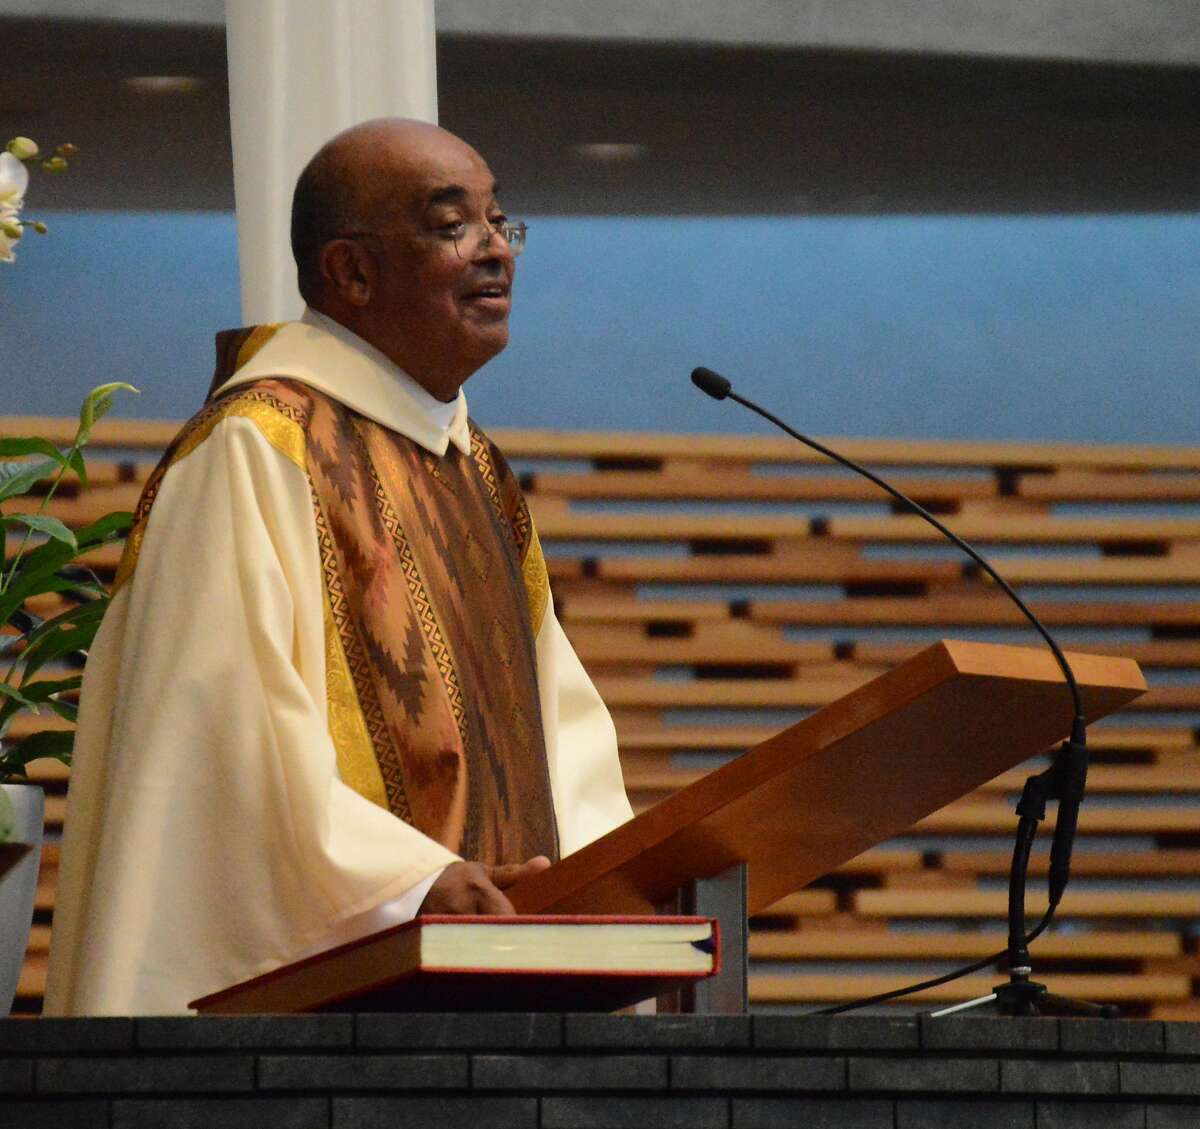 Rev. Jay Matthews, 70, the first African American ordained Catholic priest in Northern California, died Saturday, March 30, 2019, of an apparent heart attack.